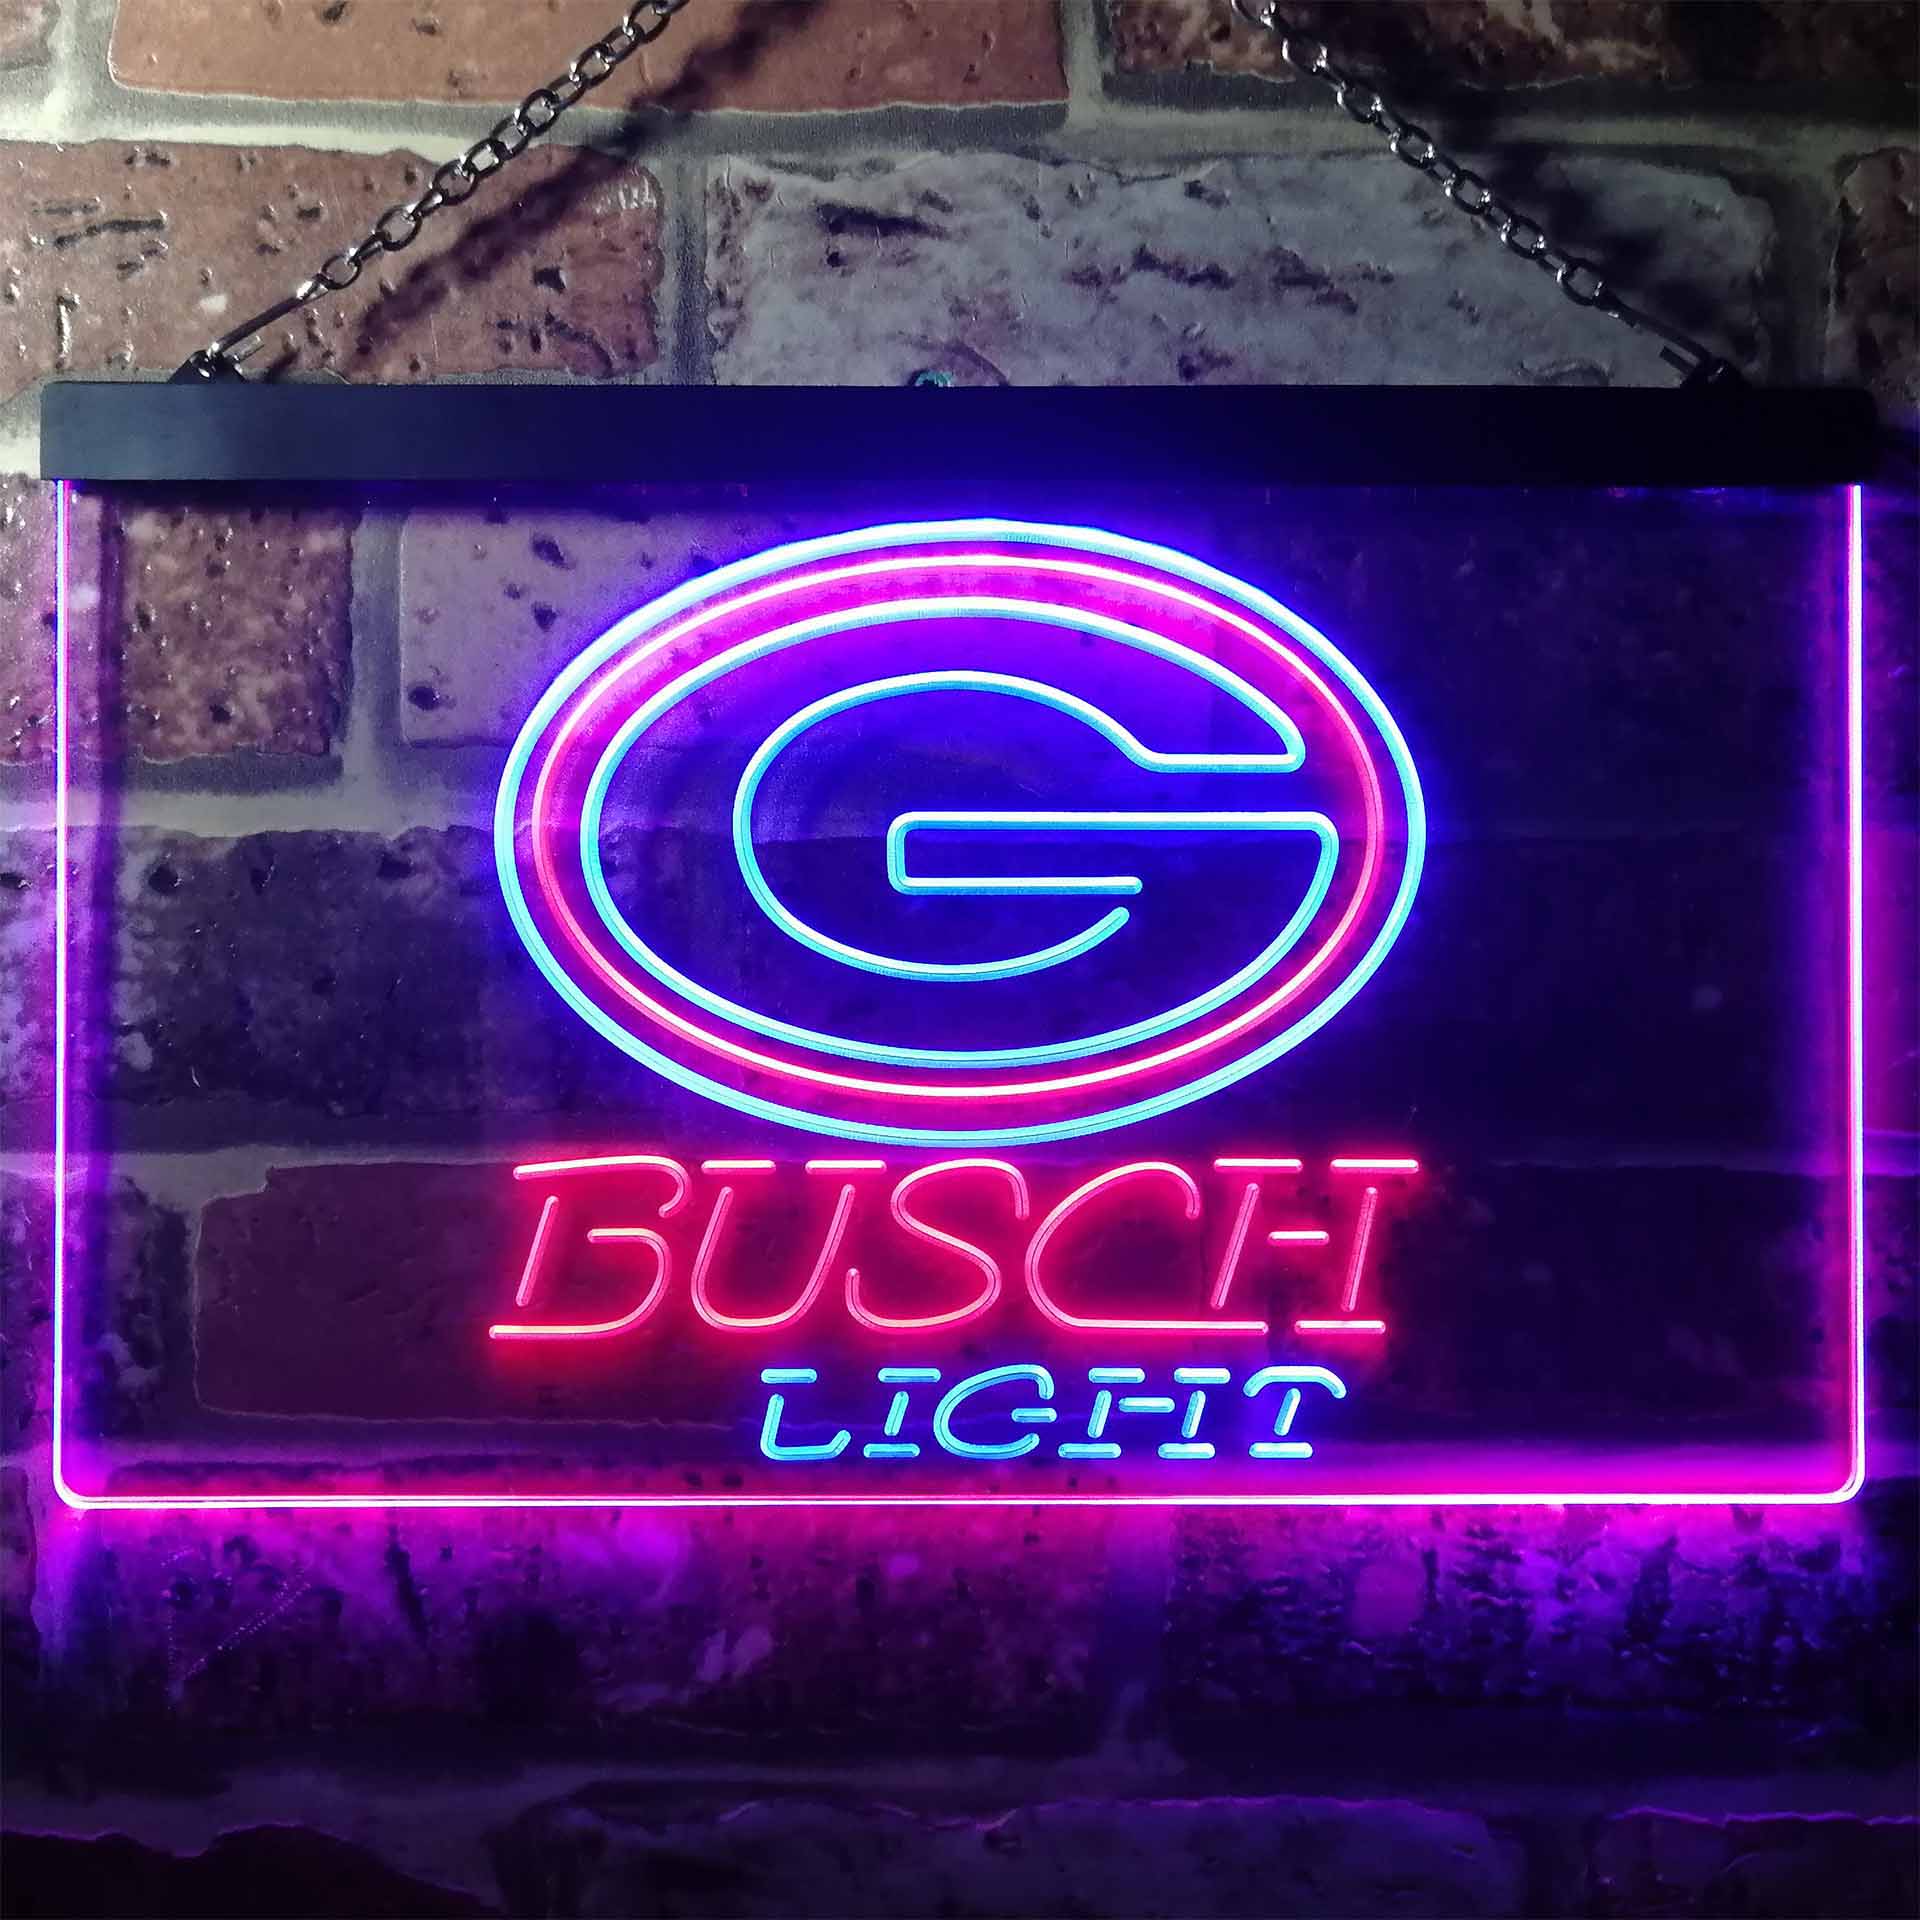 Green Bay Packers Busch Light LED Neon Sign